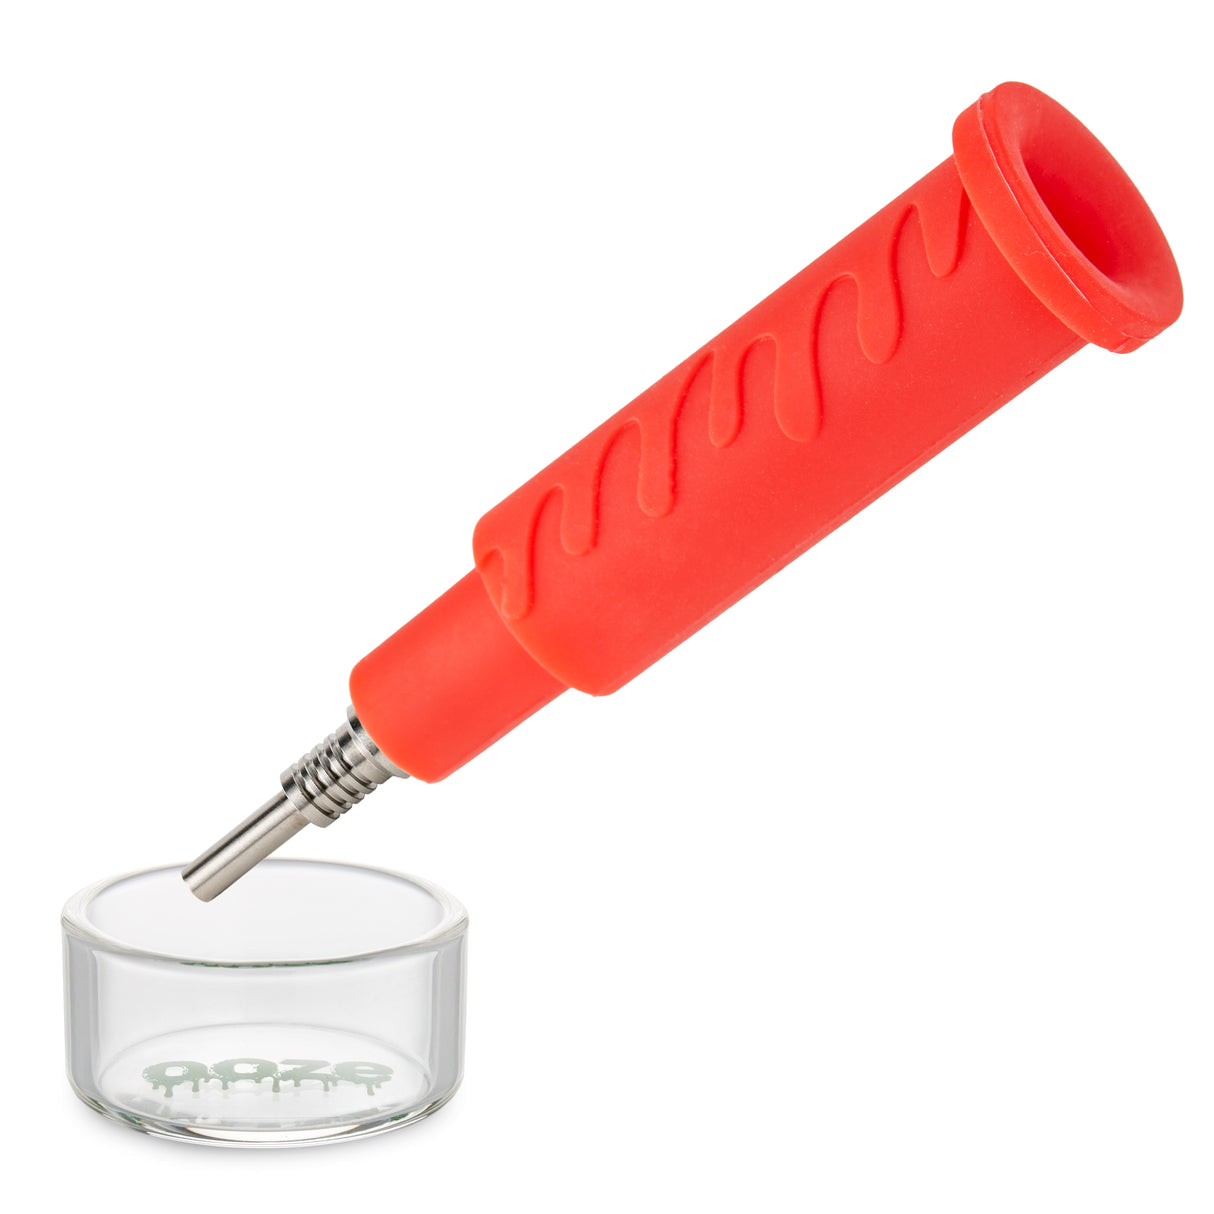 Ooze Cranium Silicone Water Pipe, Dab Rig & Dab Straw - Scarlet